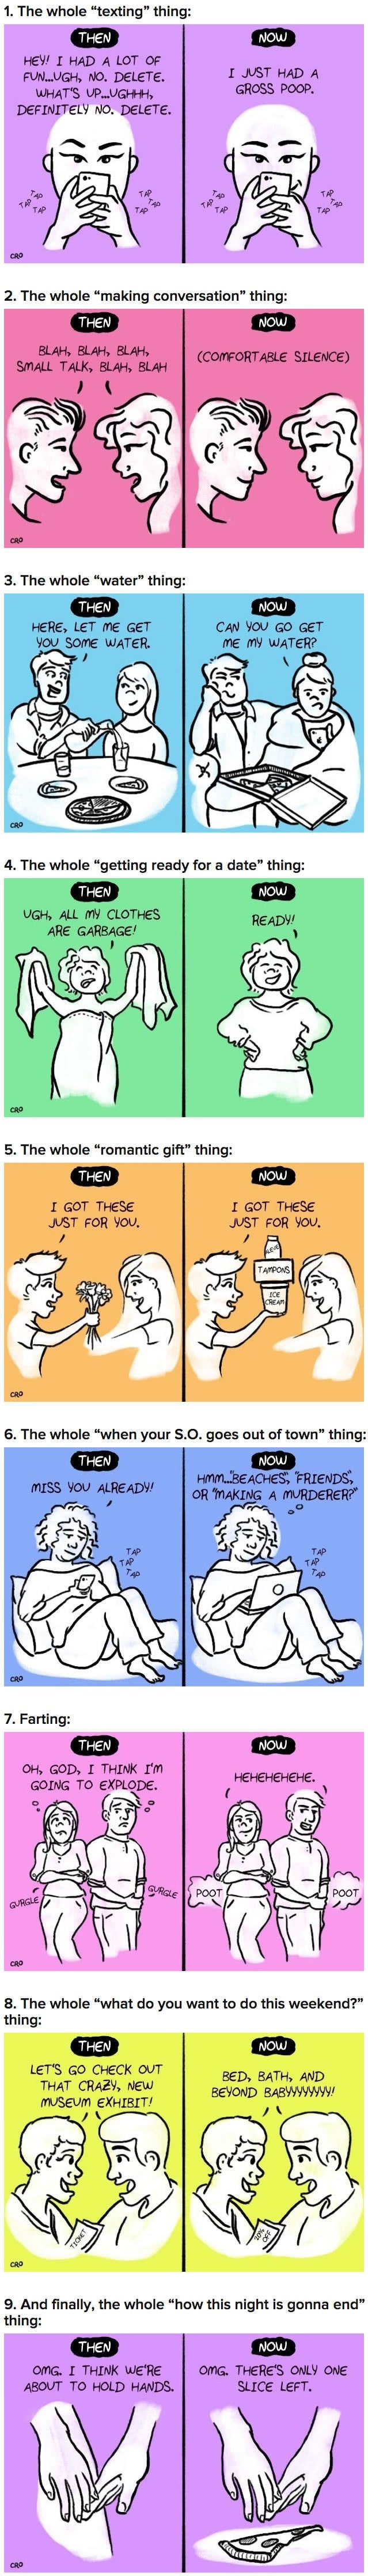 Dating: Early on vs. After a long time